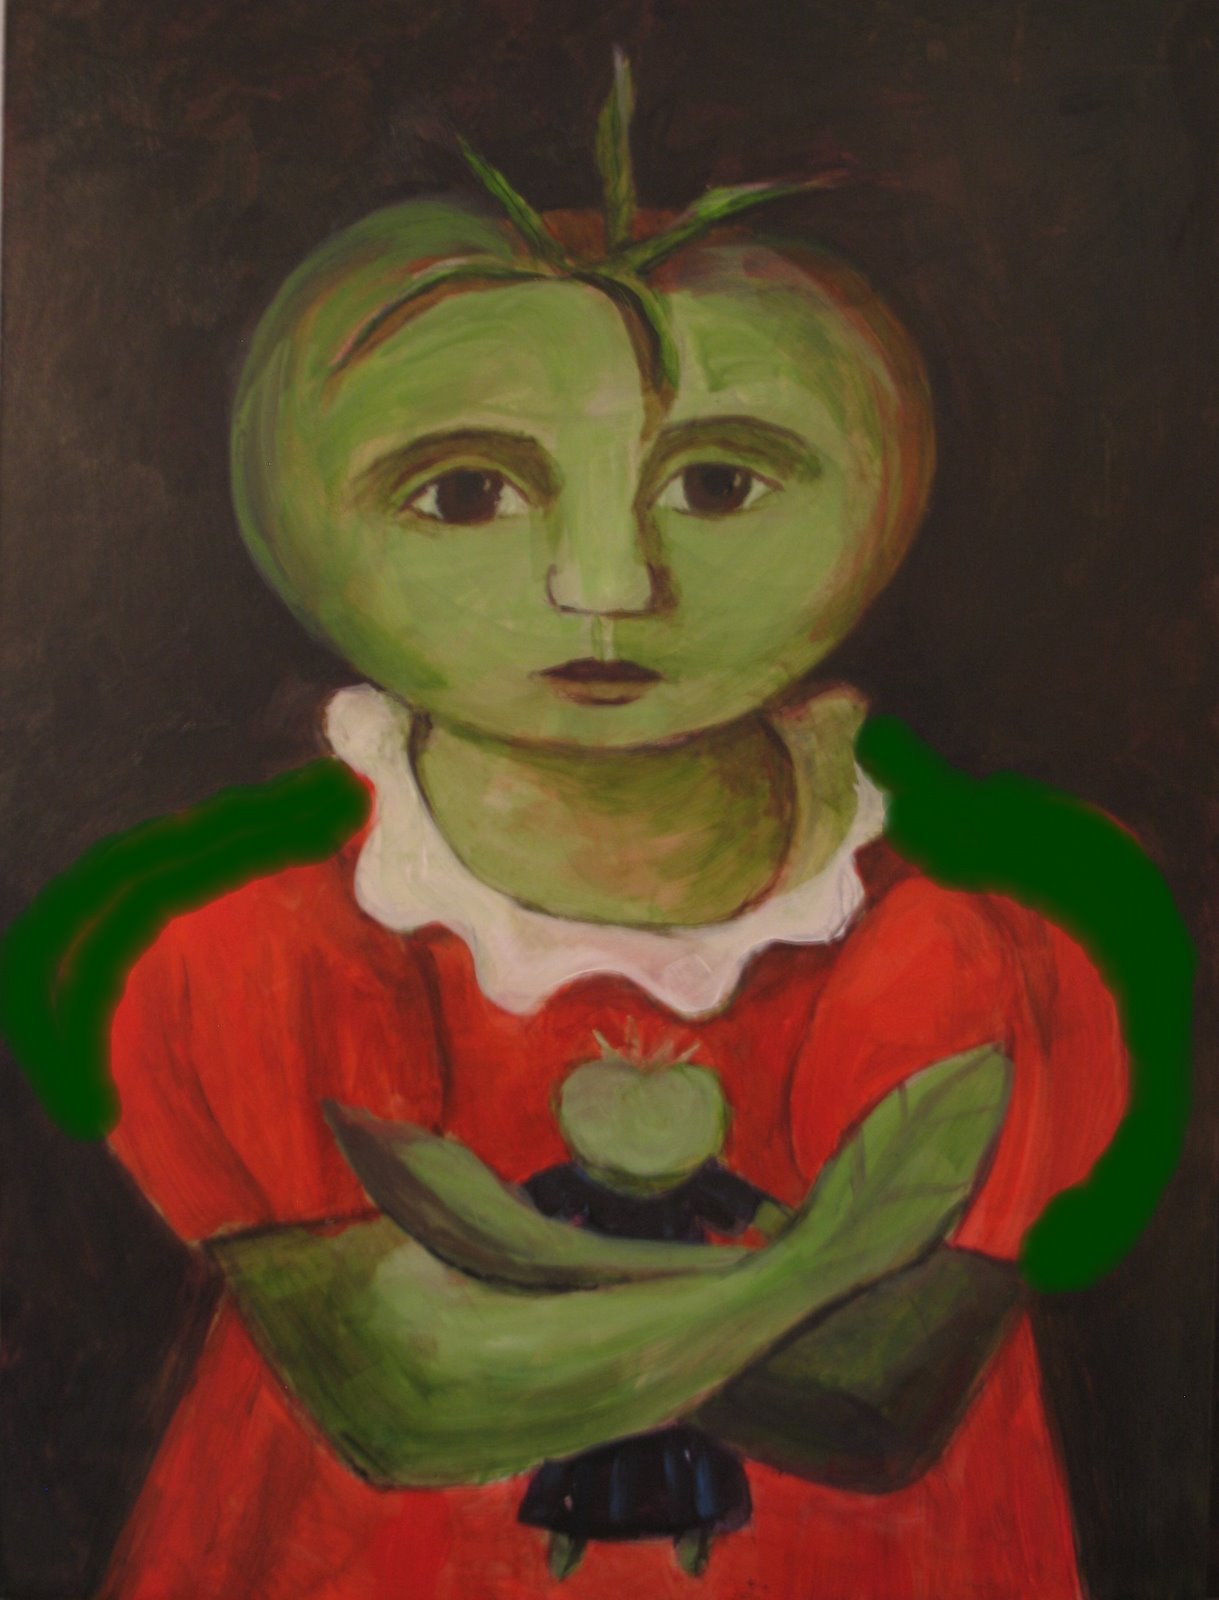 [Tomato+painting+gree+girl+in+red+amended+2.jpg]